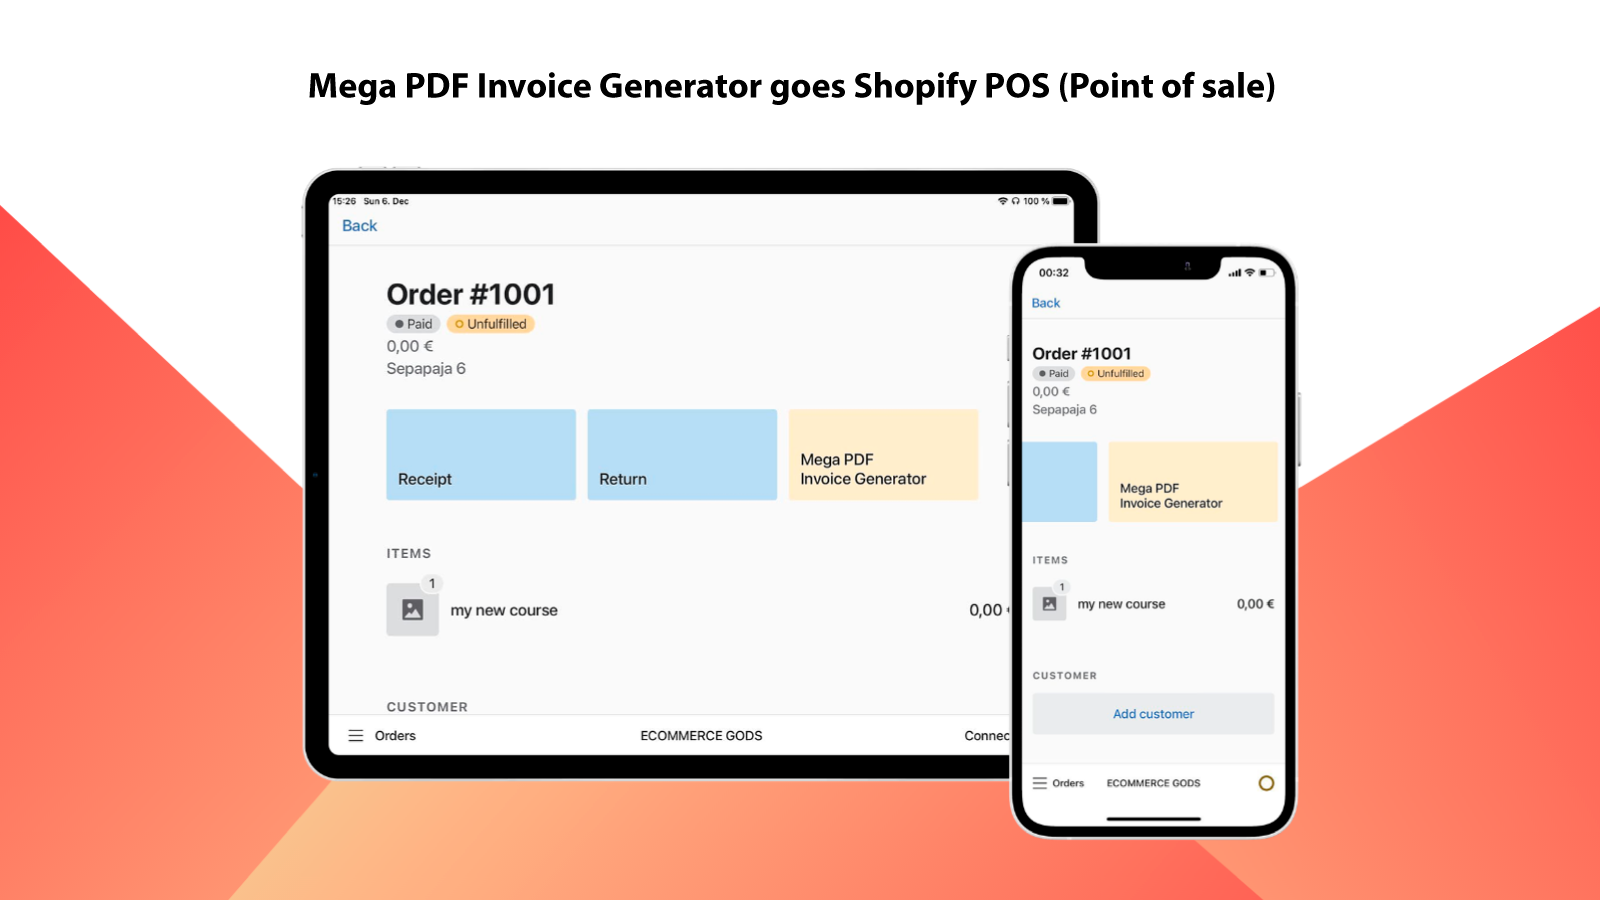 Galaxy matematiker mover Mega PDF Invoice Order Printer supports Shopify POS (Point of sale) –  Architechpro OÜ